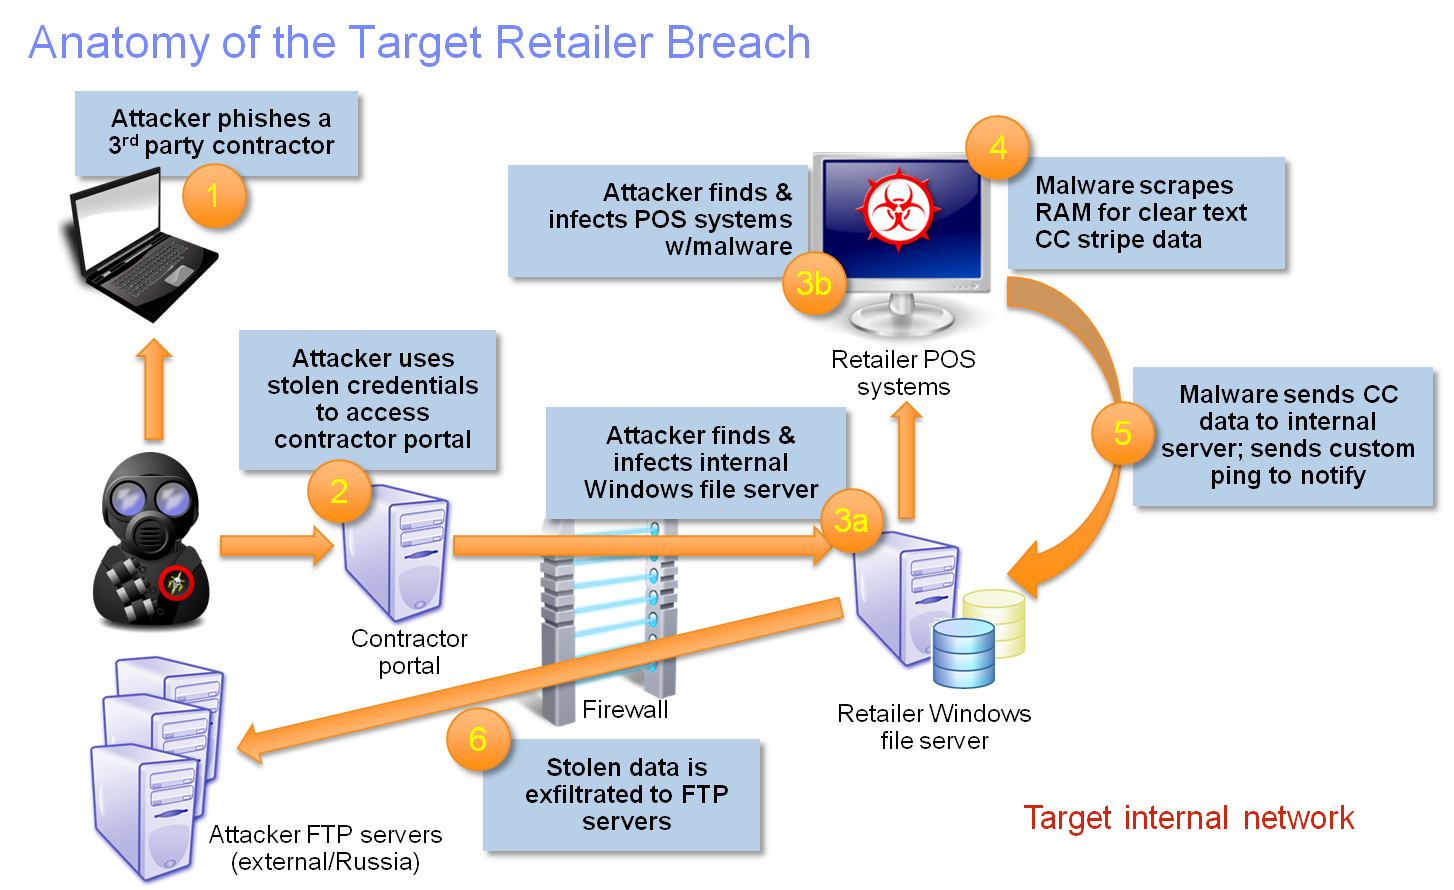 ... to Learn from the Target Breach to Protect against Similar Attacks